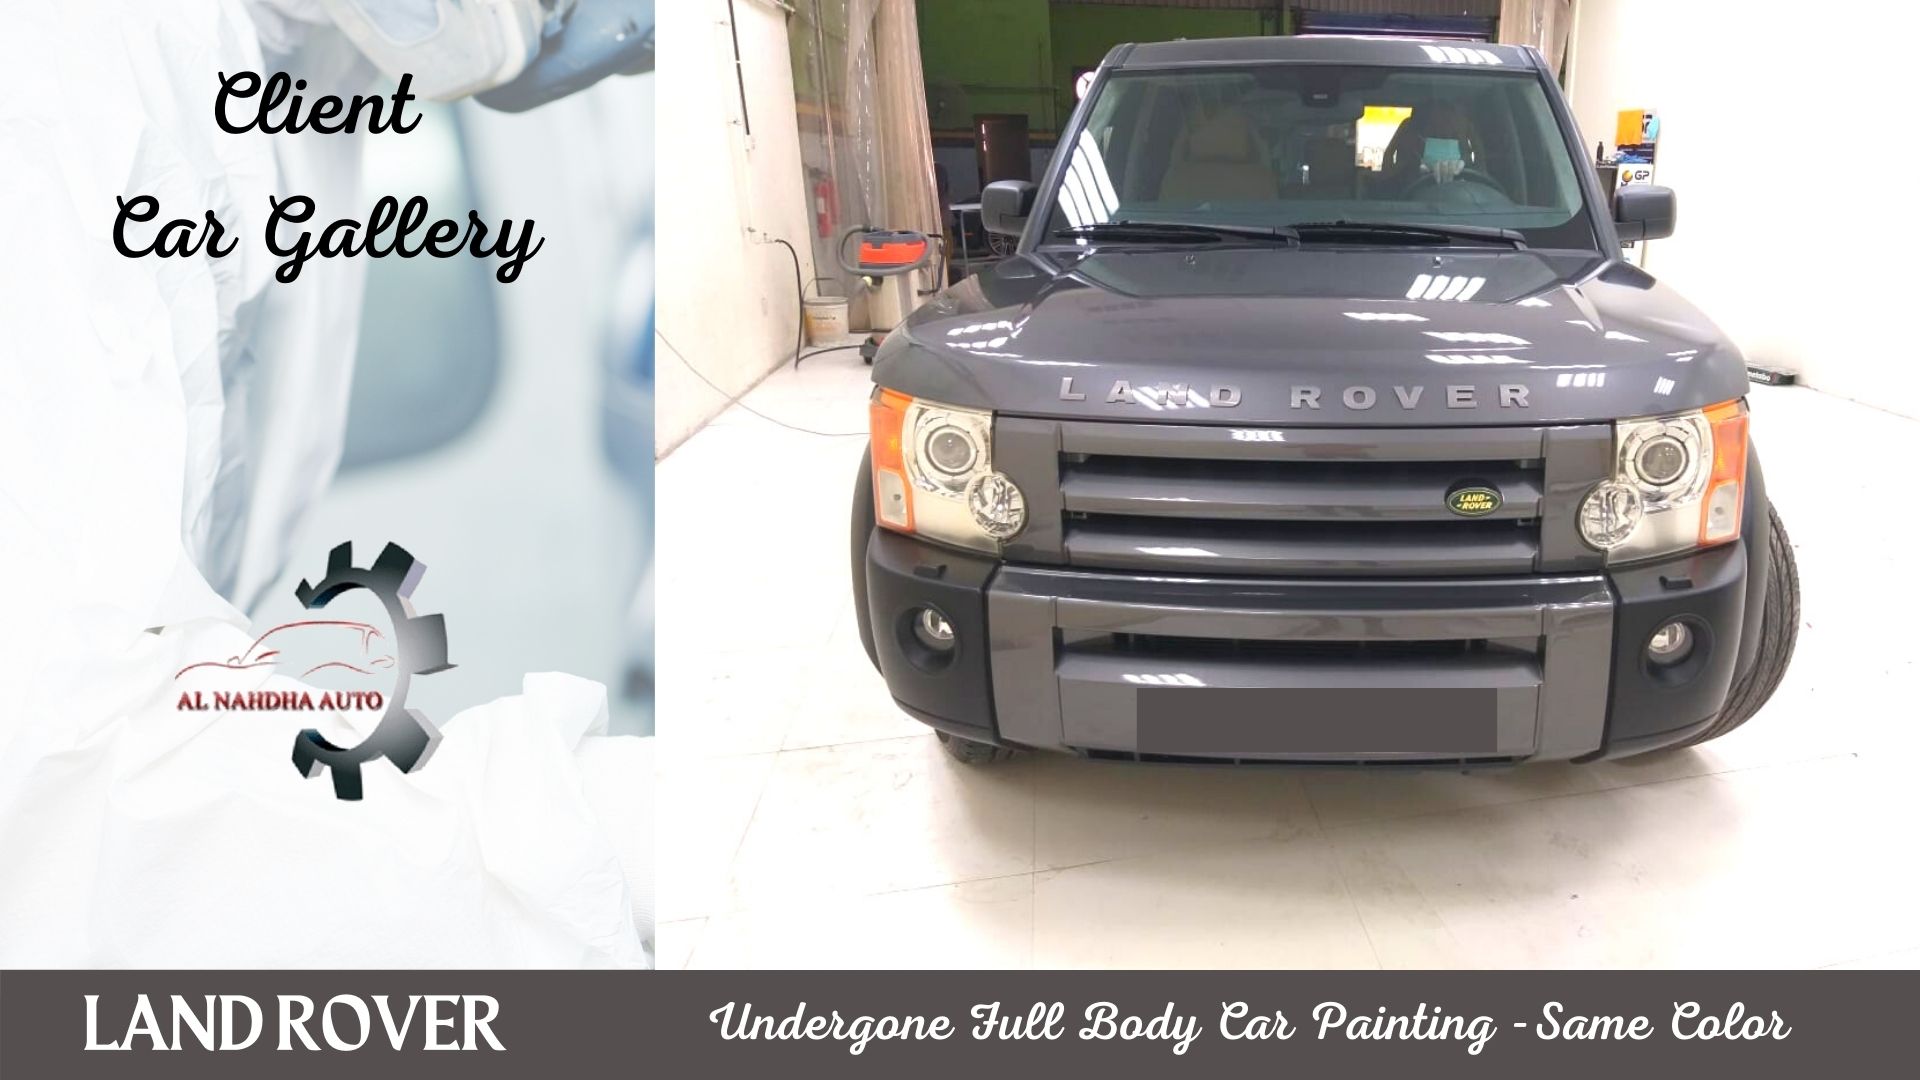 Full Body Car Painting Land Rover